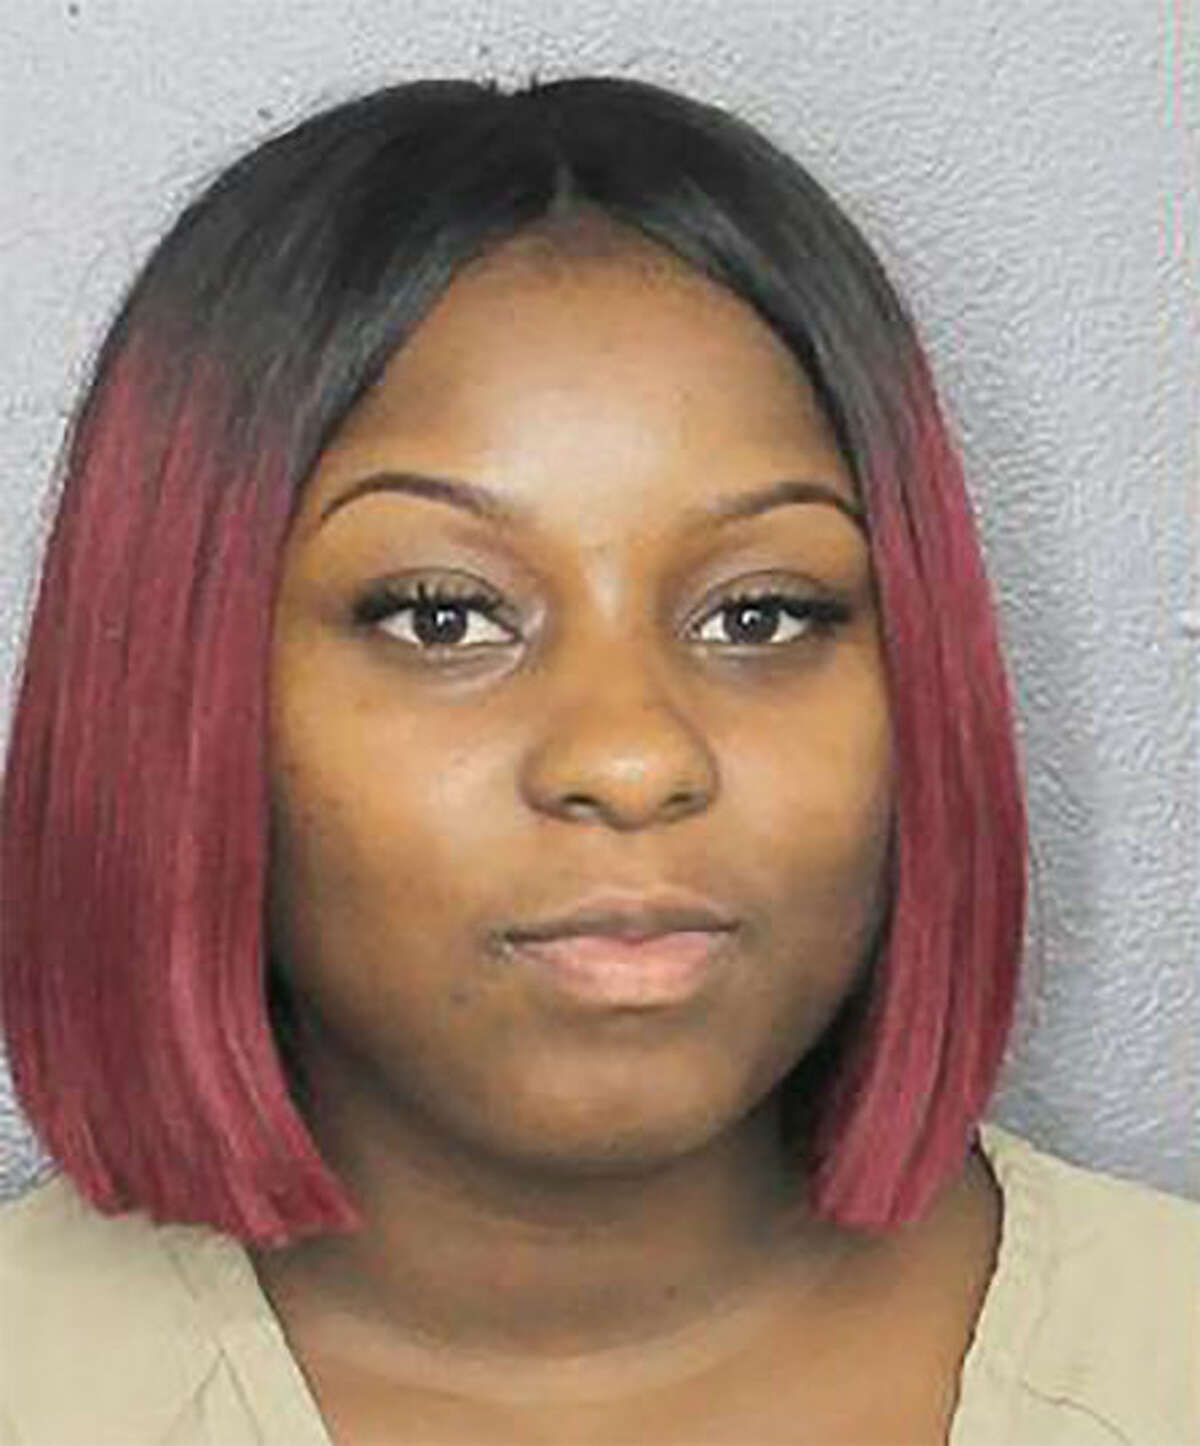 Patresha Isidore, 24, sped 19 miles on a Florida interstate with her ex-boyfriend clinging to the hood of her Mercedes-Benz, and a video of the incident is going viral on Twitter with 1.3 million views.